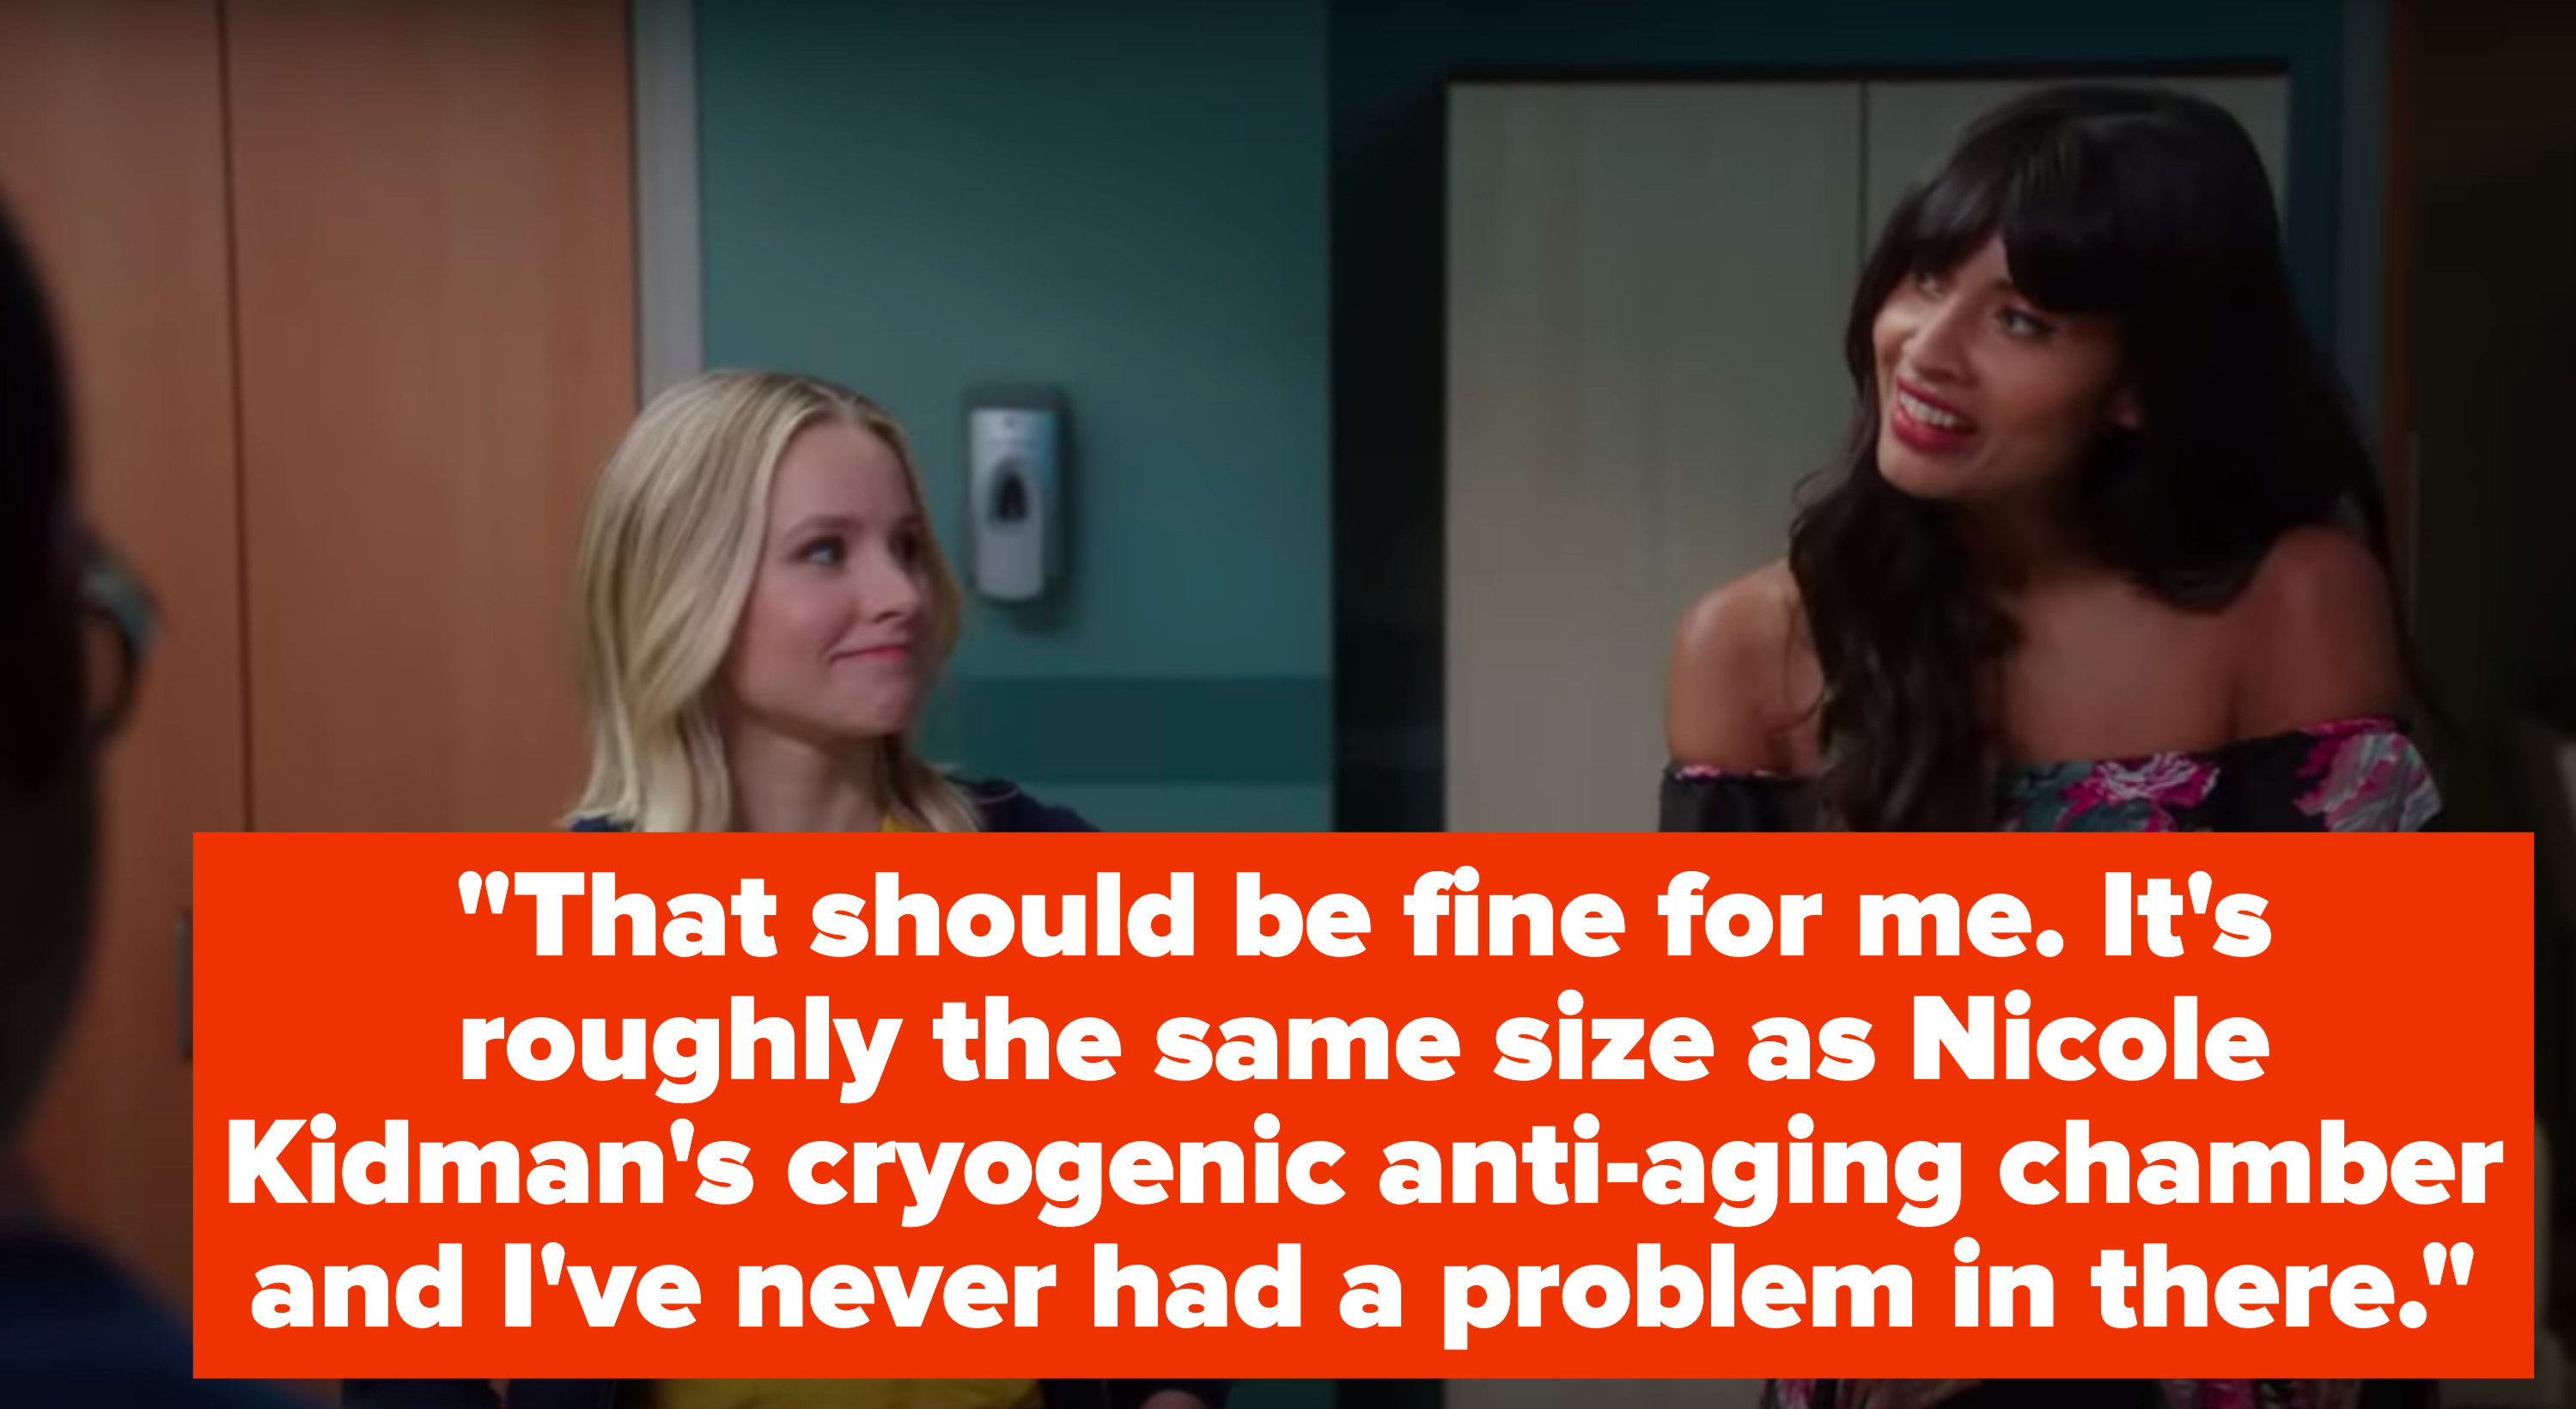 Tahani says, That should be fine for me, it&#x27;s roughly the same size as Nicole Kidman&#x27;s cryogenic anti-aging chamber and I&#x27;ve never had a problem in there